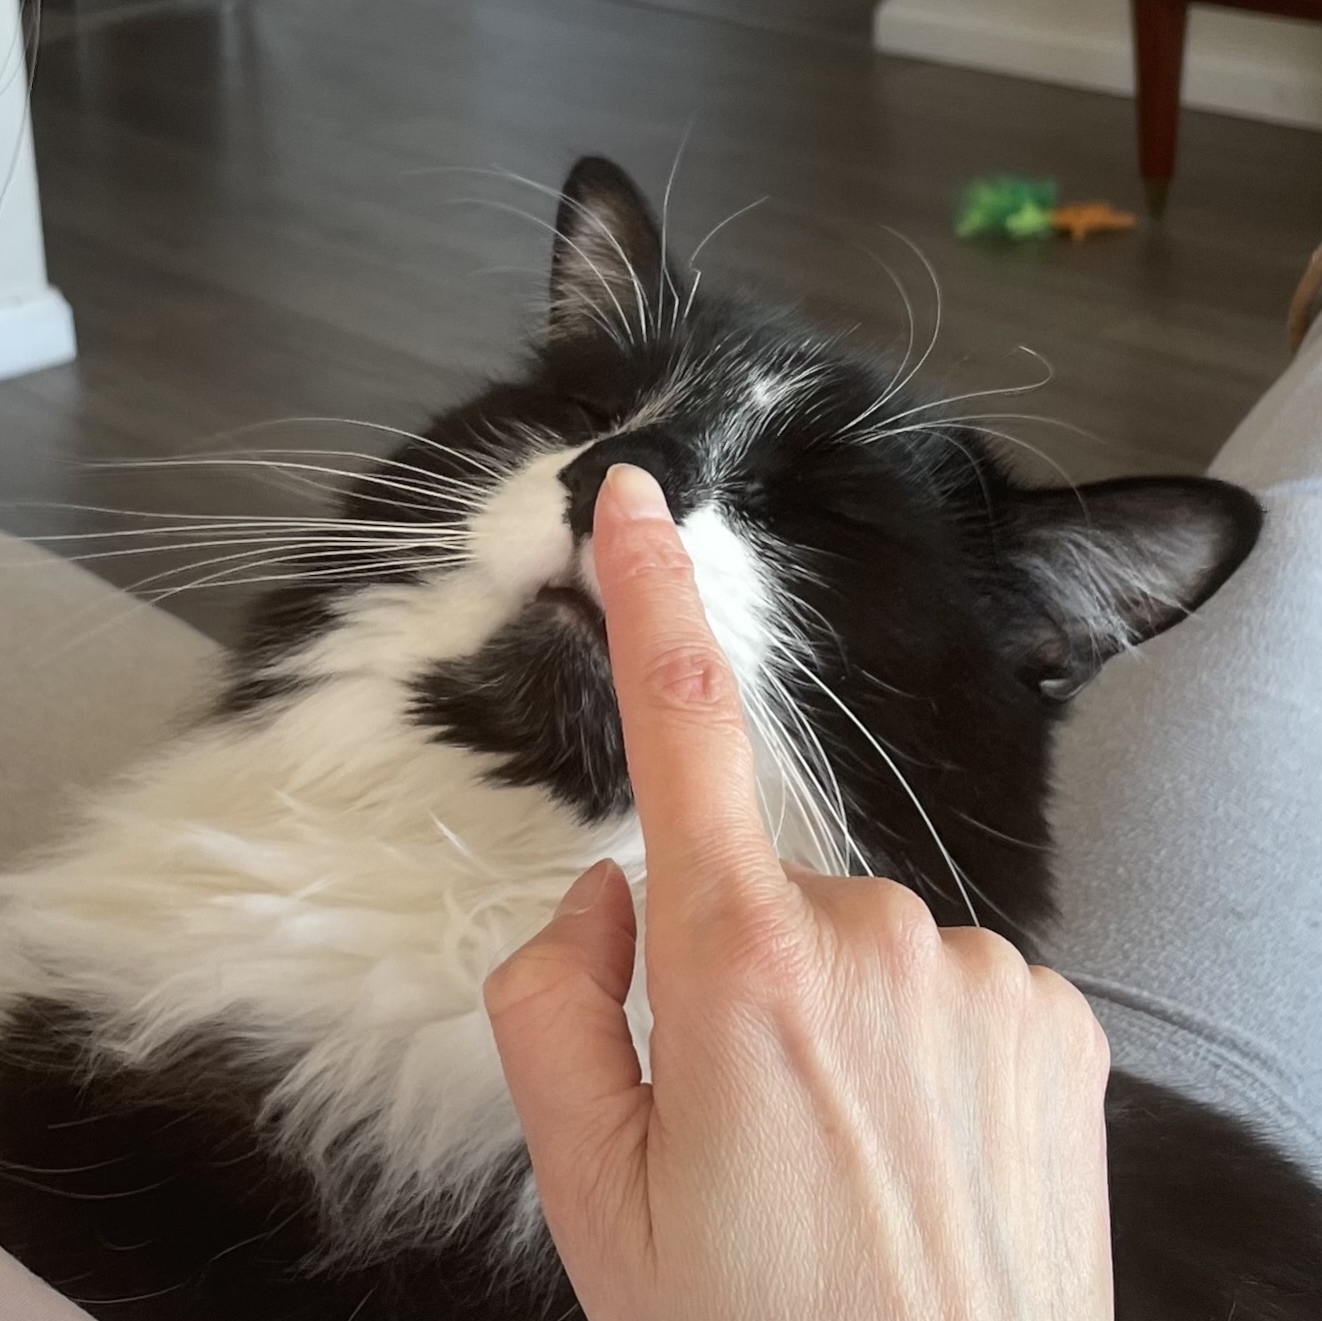 A black-and-white tuxedo cat makes a mushy face as someone’s index finger gently boops its nose.